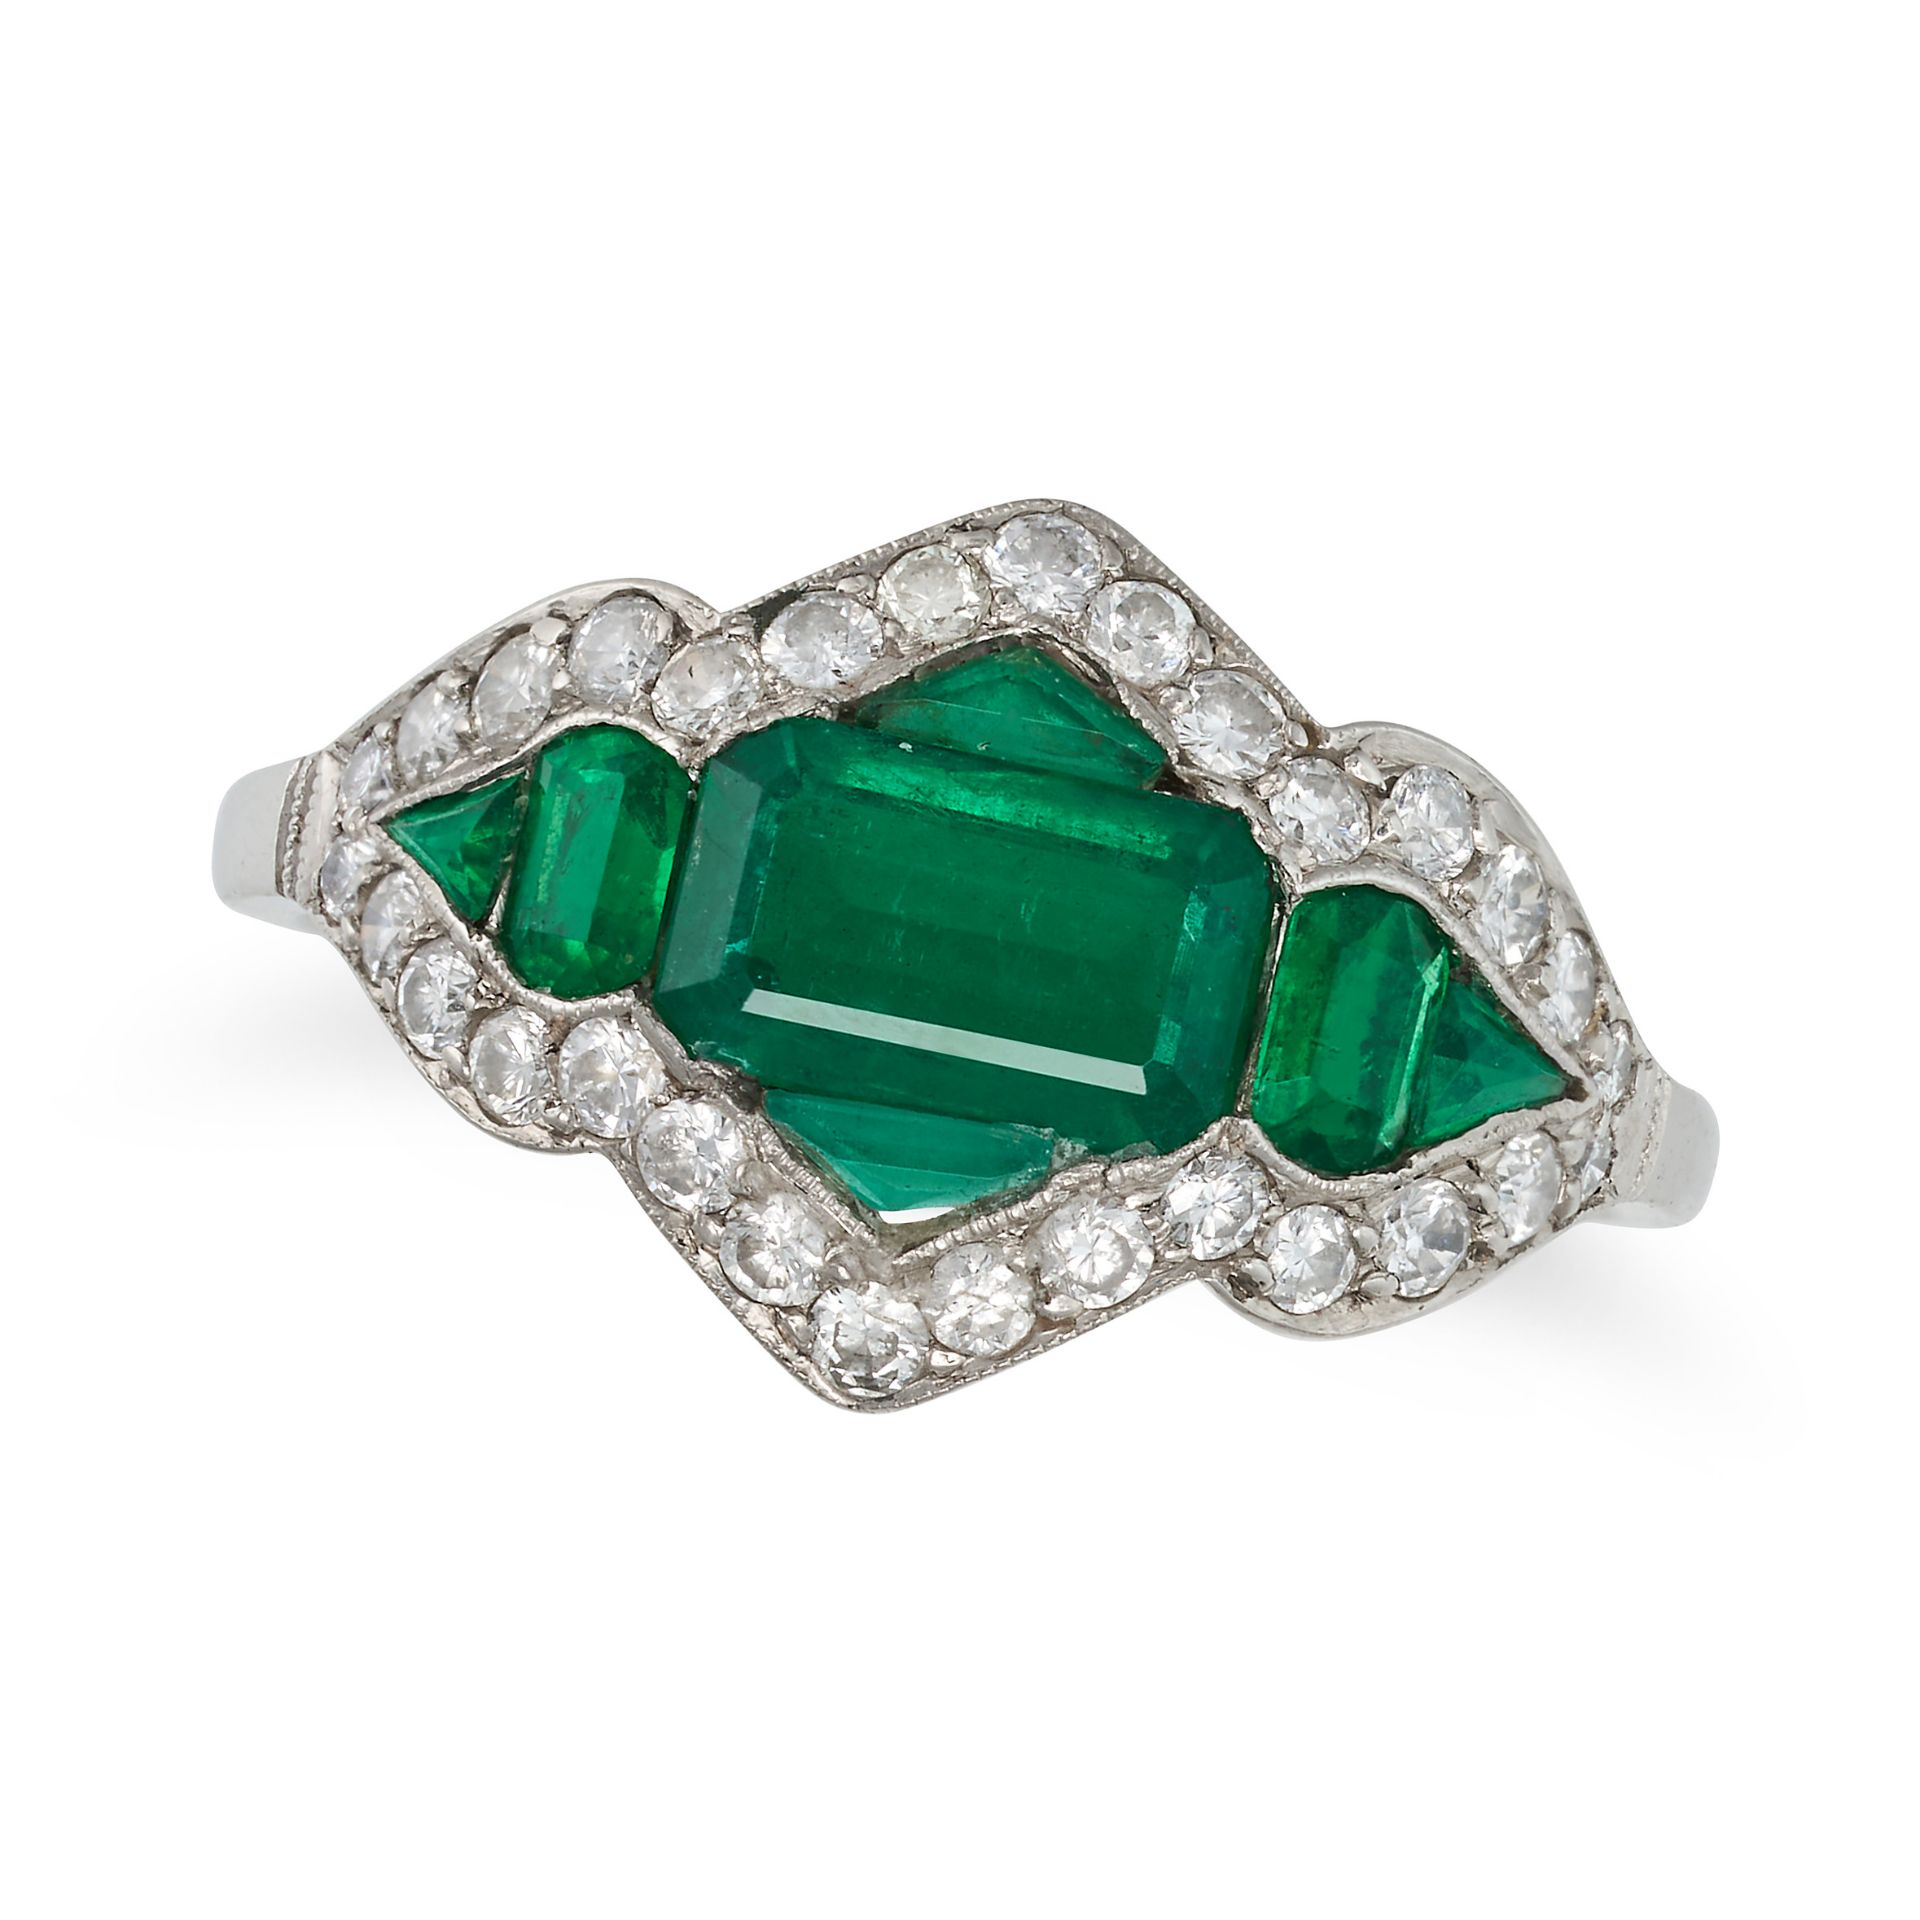 AN EMERALD AND DIAMOND RING set with step cut emeralds in a border of round brilliant cut diamond...